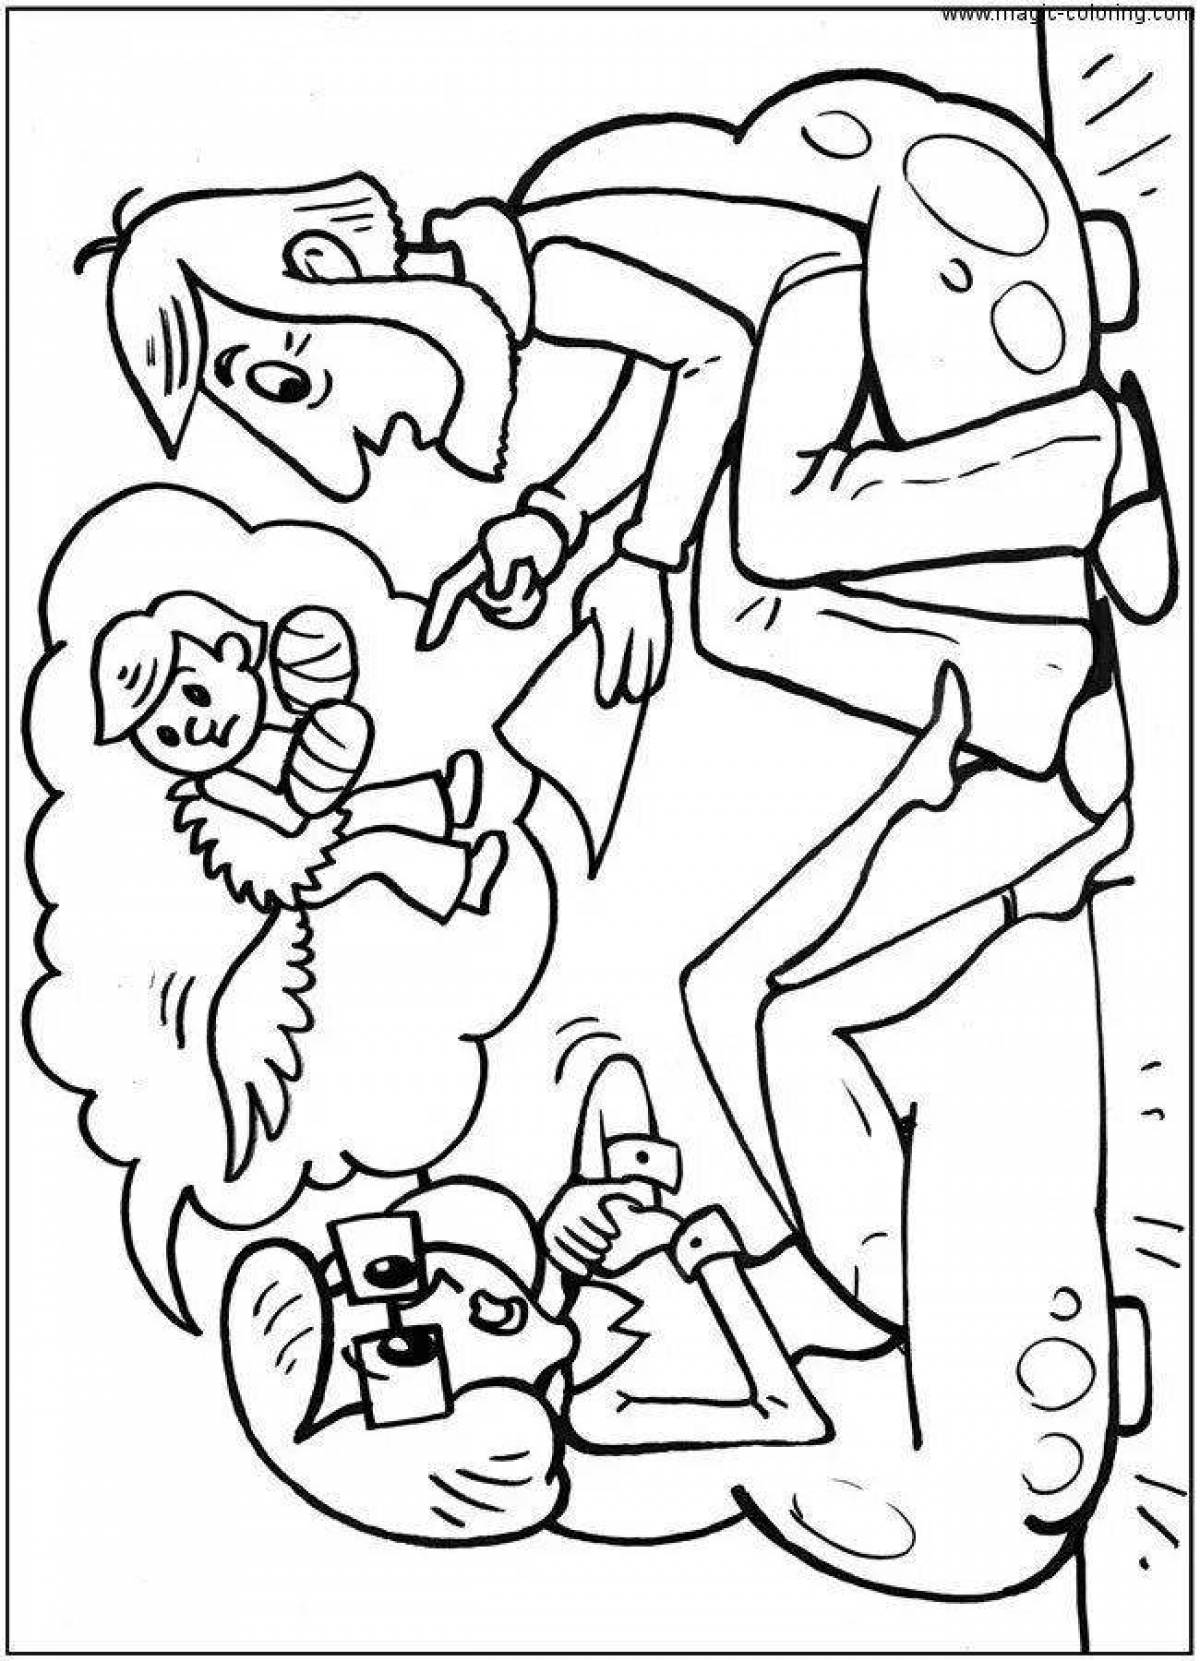 Coloring page cheerful uncle fedor with a dog and a cat